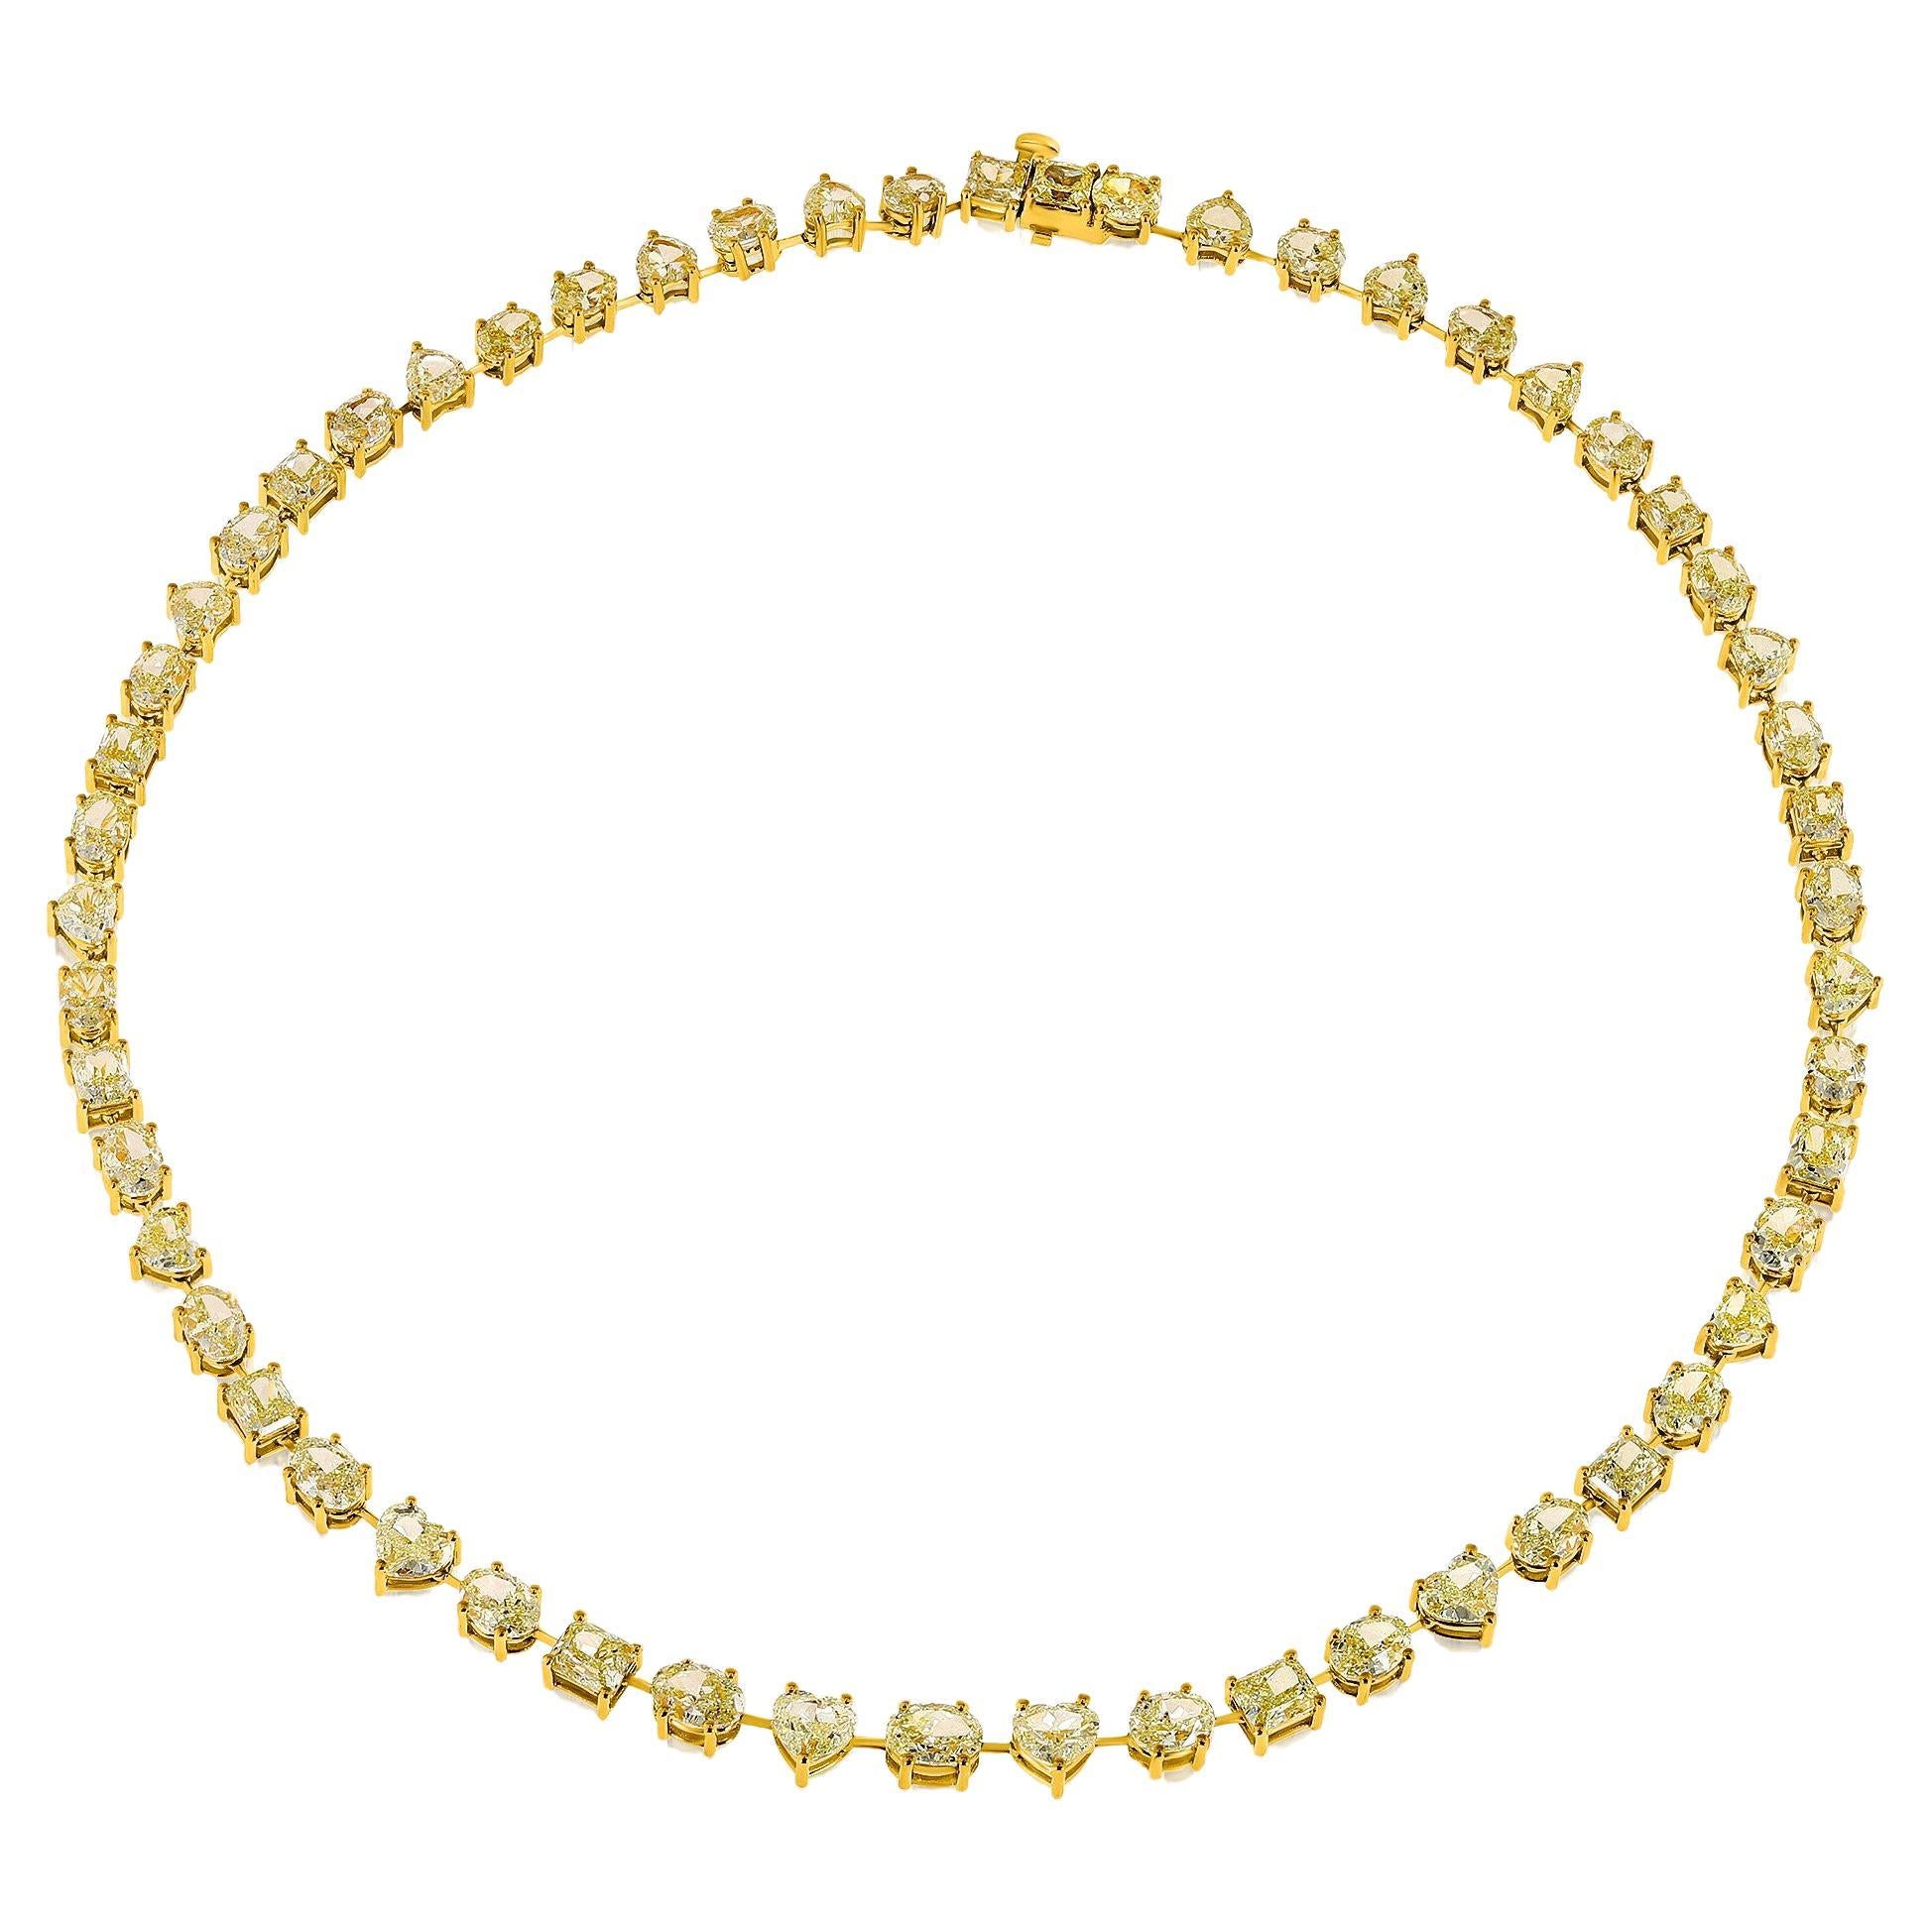 30 Carat Natural Mix Shaped Yellow Diamond Necklace, In 18 Karat Yellow Gold. For Sale